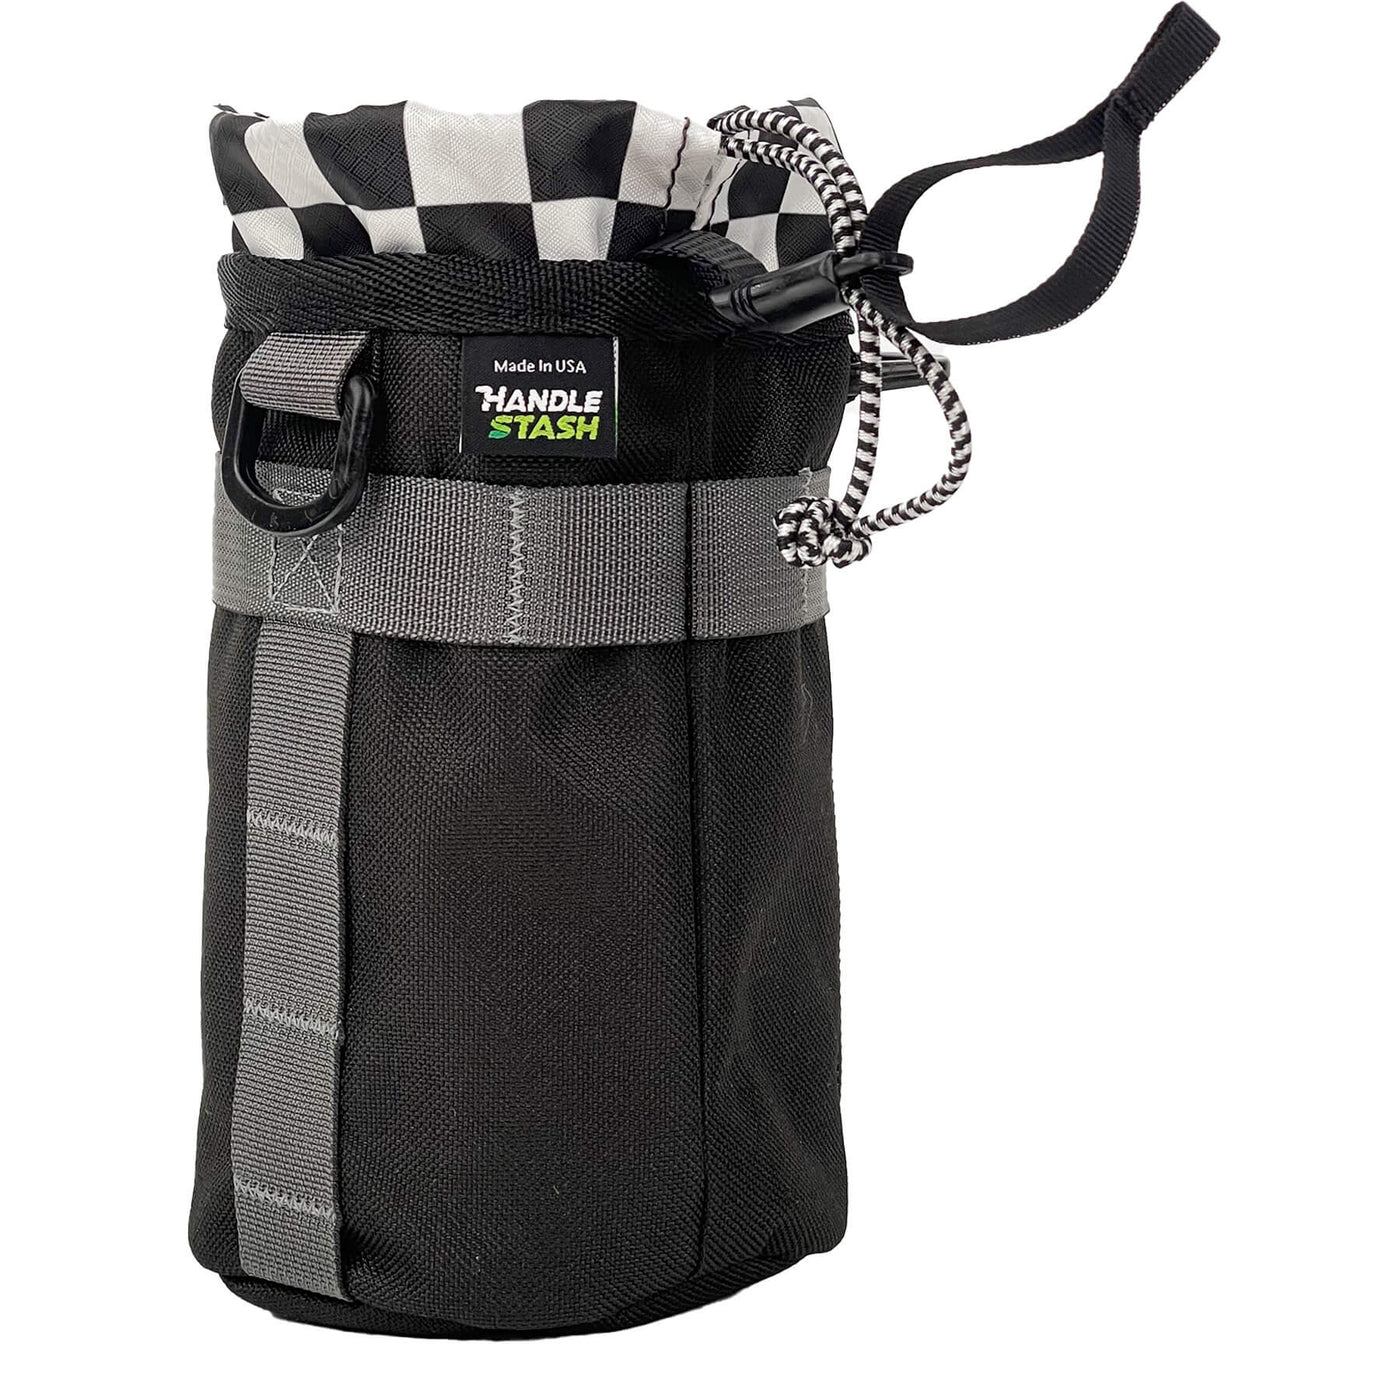 Black stem bag with checkered liner -side view.